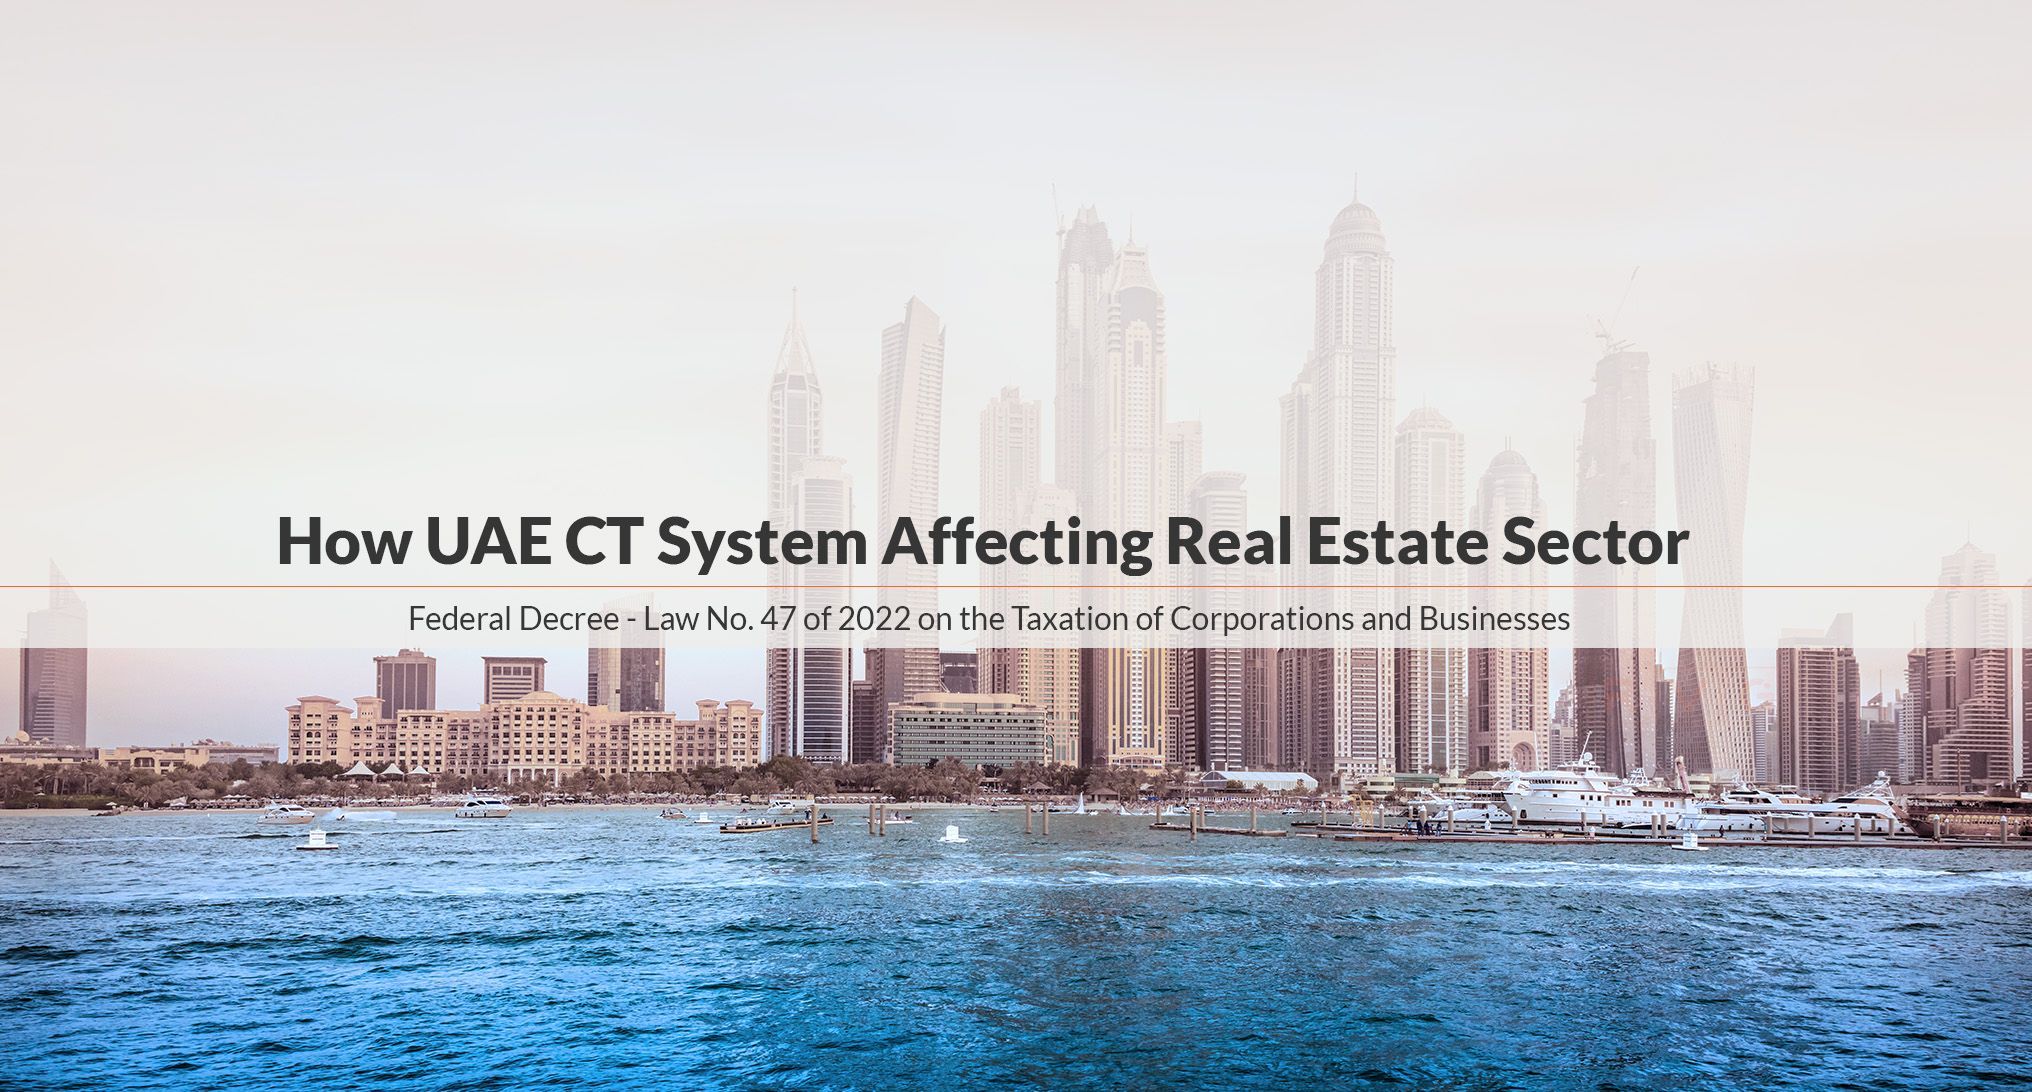 How UAE CT System Affecting Real Estate Sector